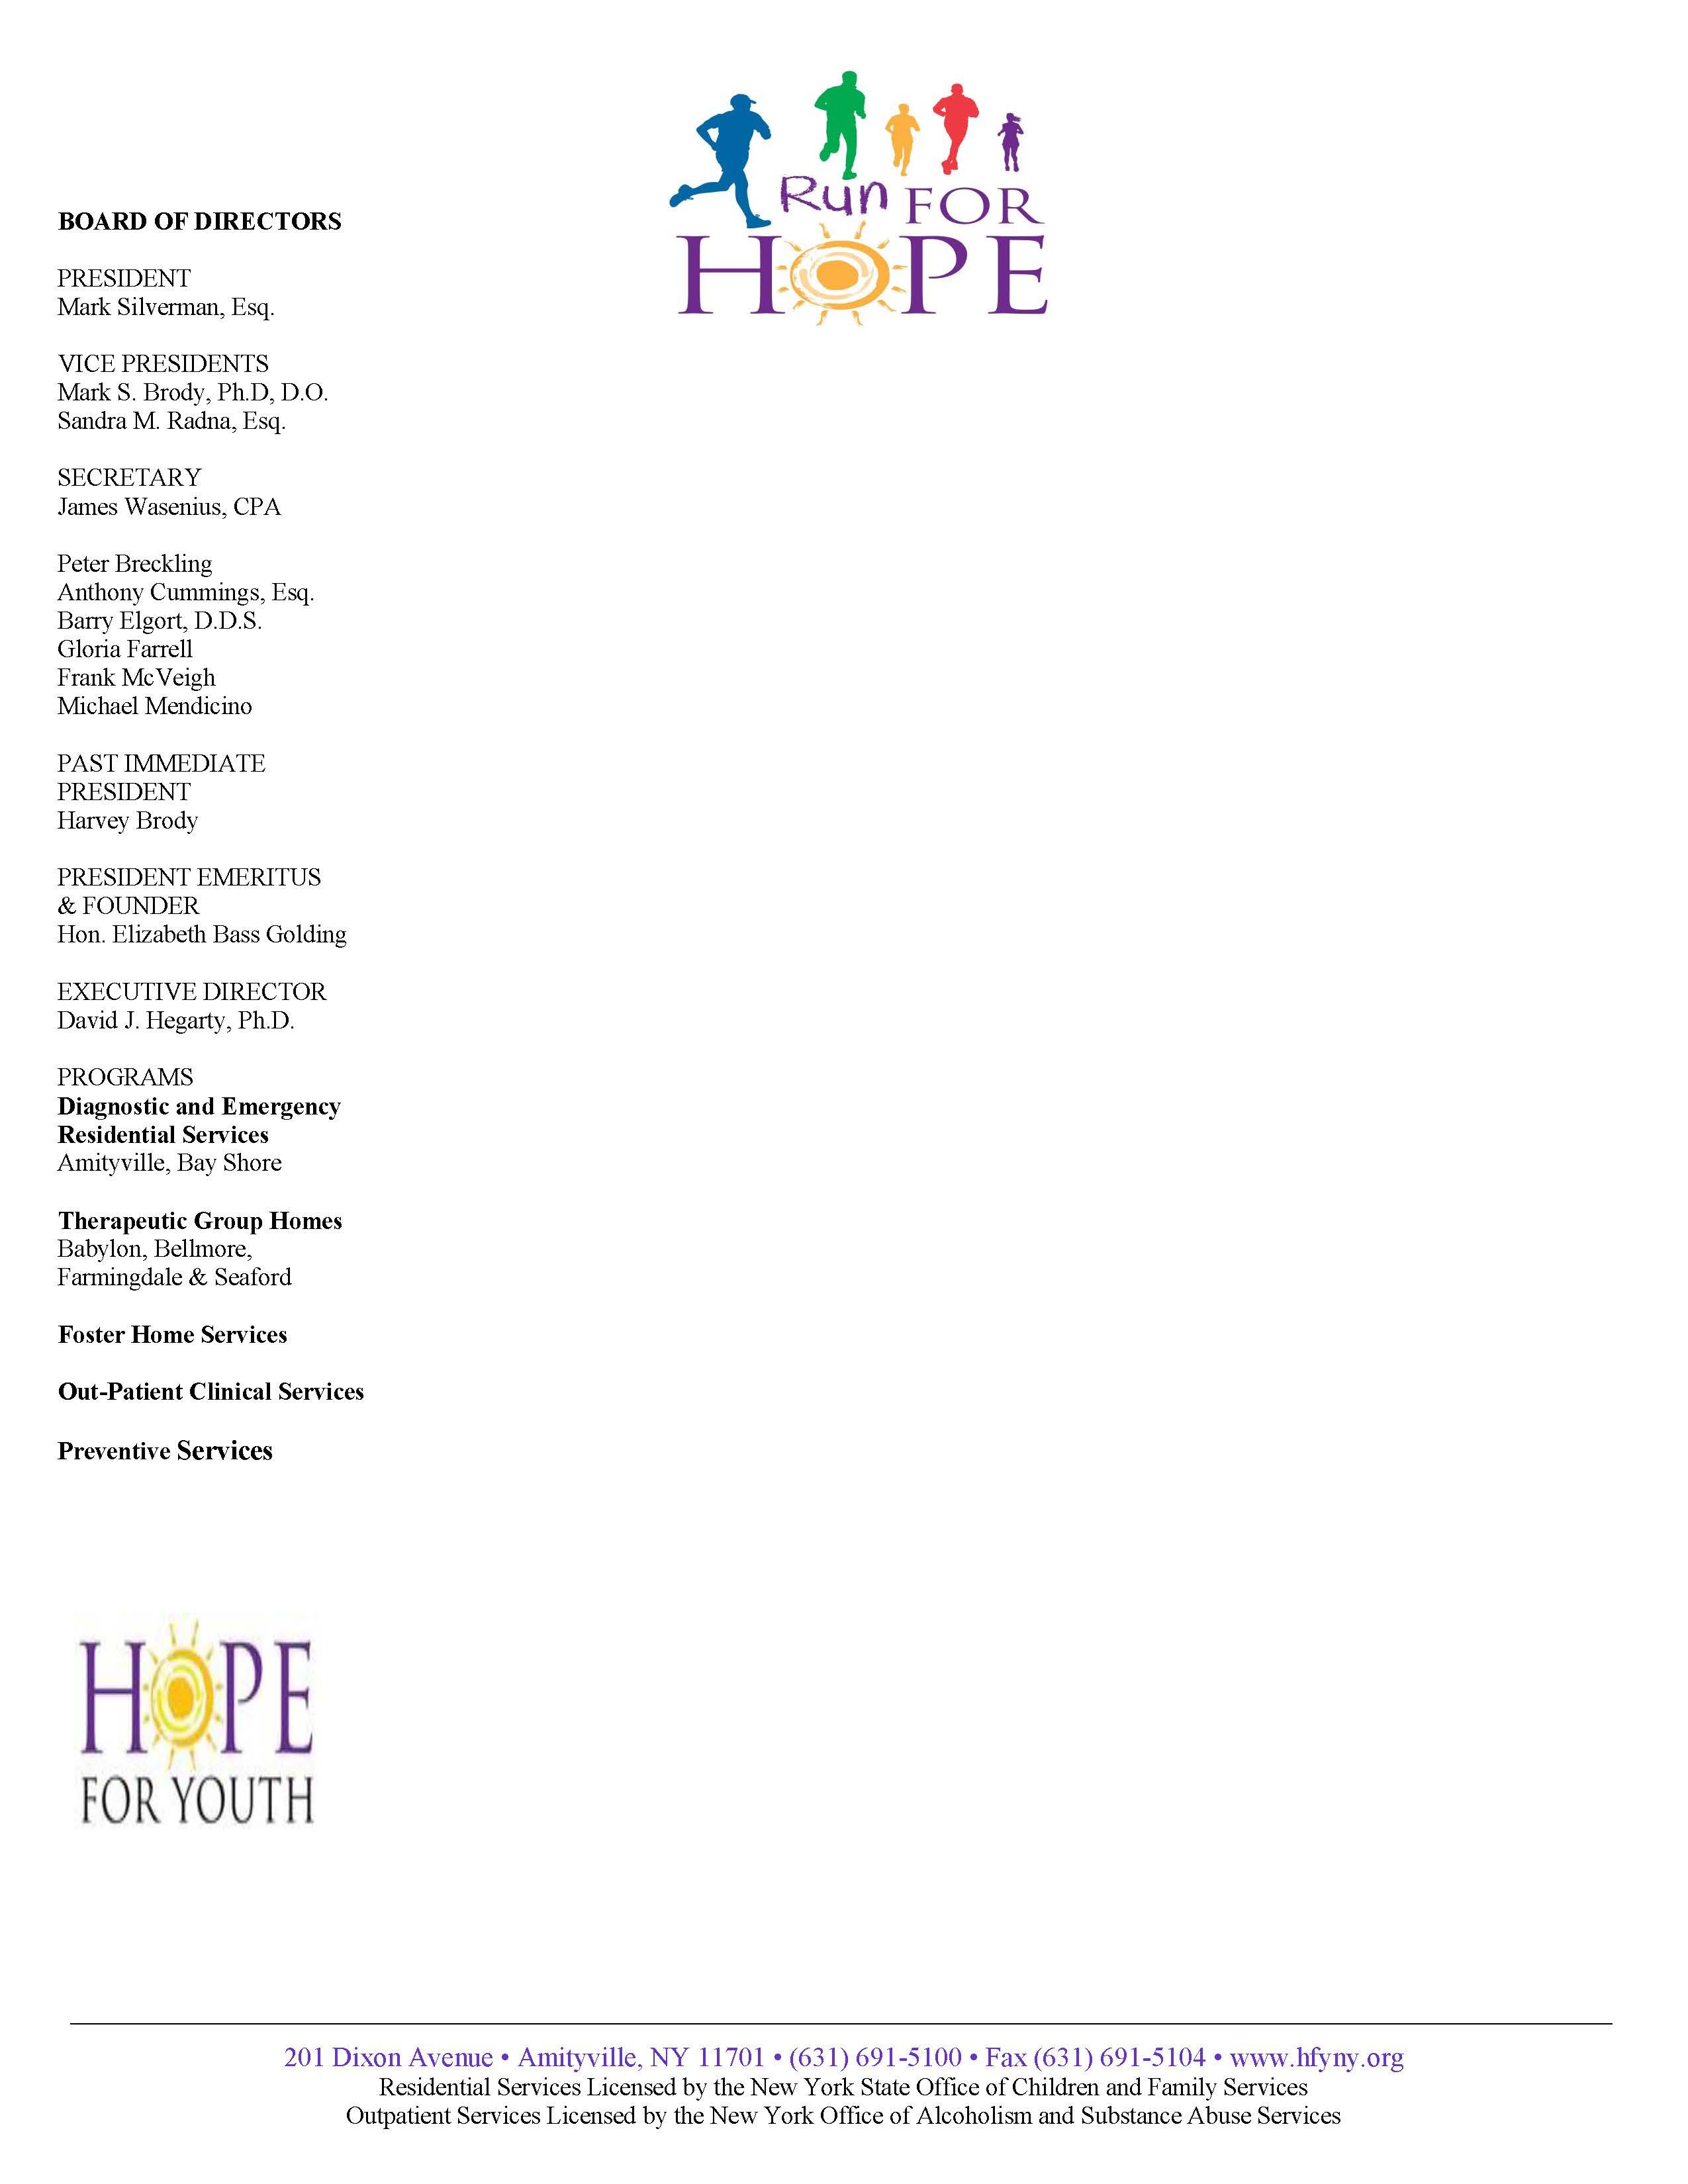 Hope for Youth Letterhead